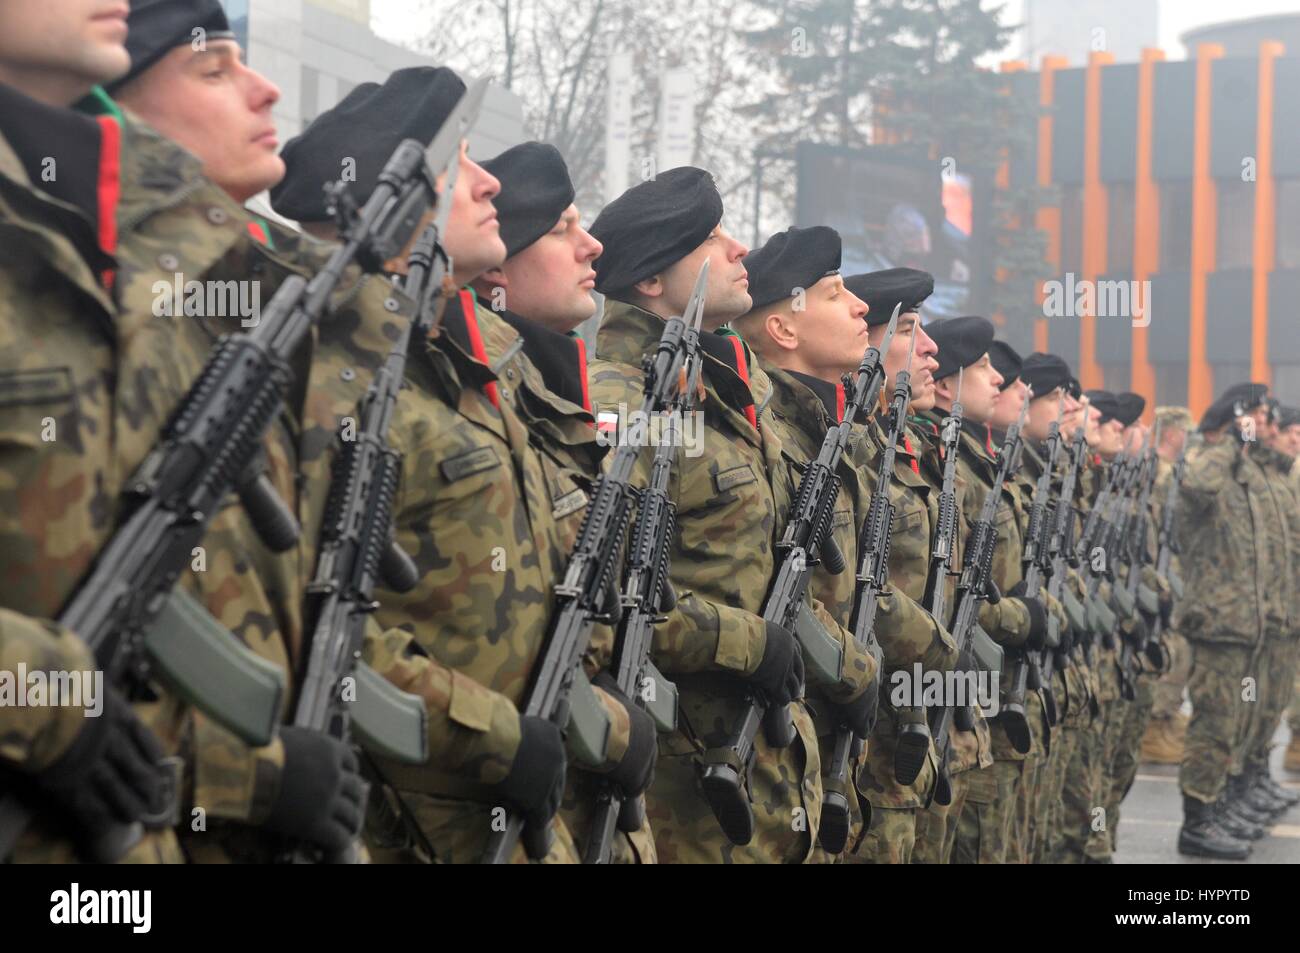 Polish soldiers stand in formation during a celebration ceremony welcoming U.S. soldiers February 5, 2017 in Boleslawiec, Poland. Stock Photo